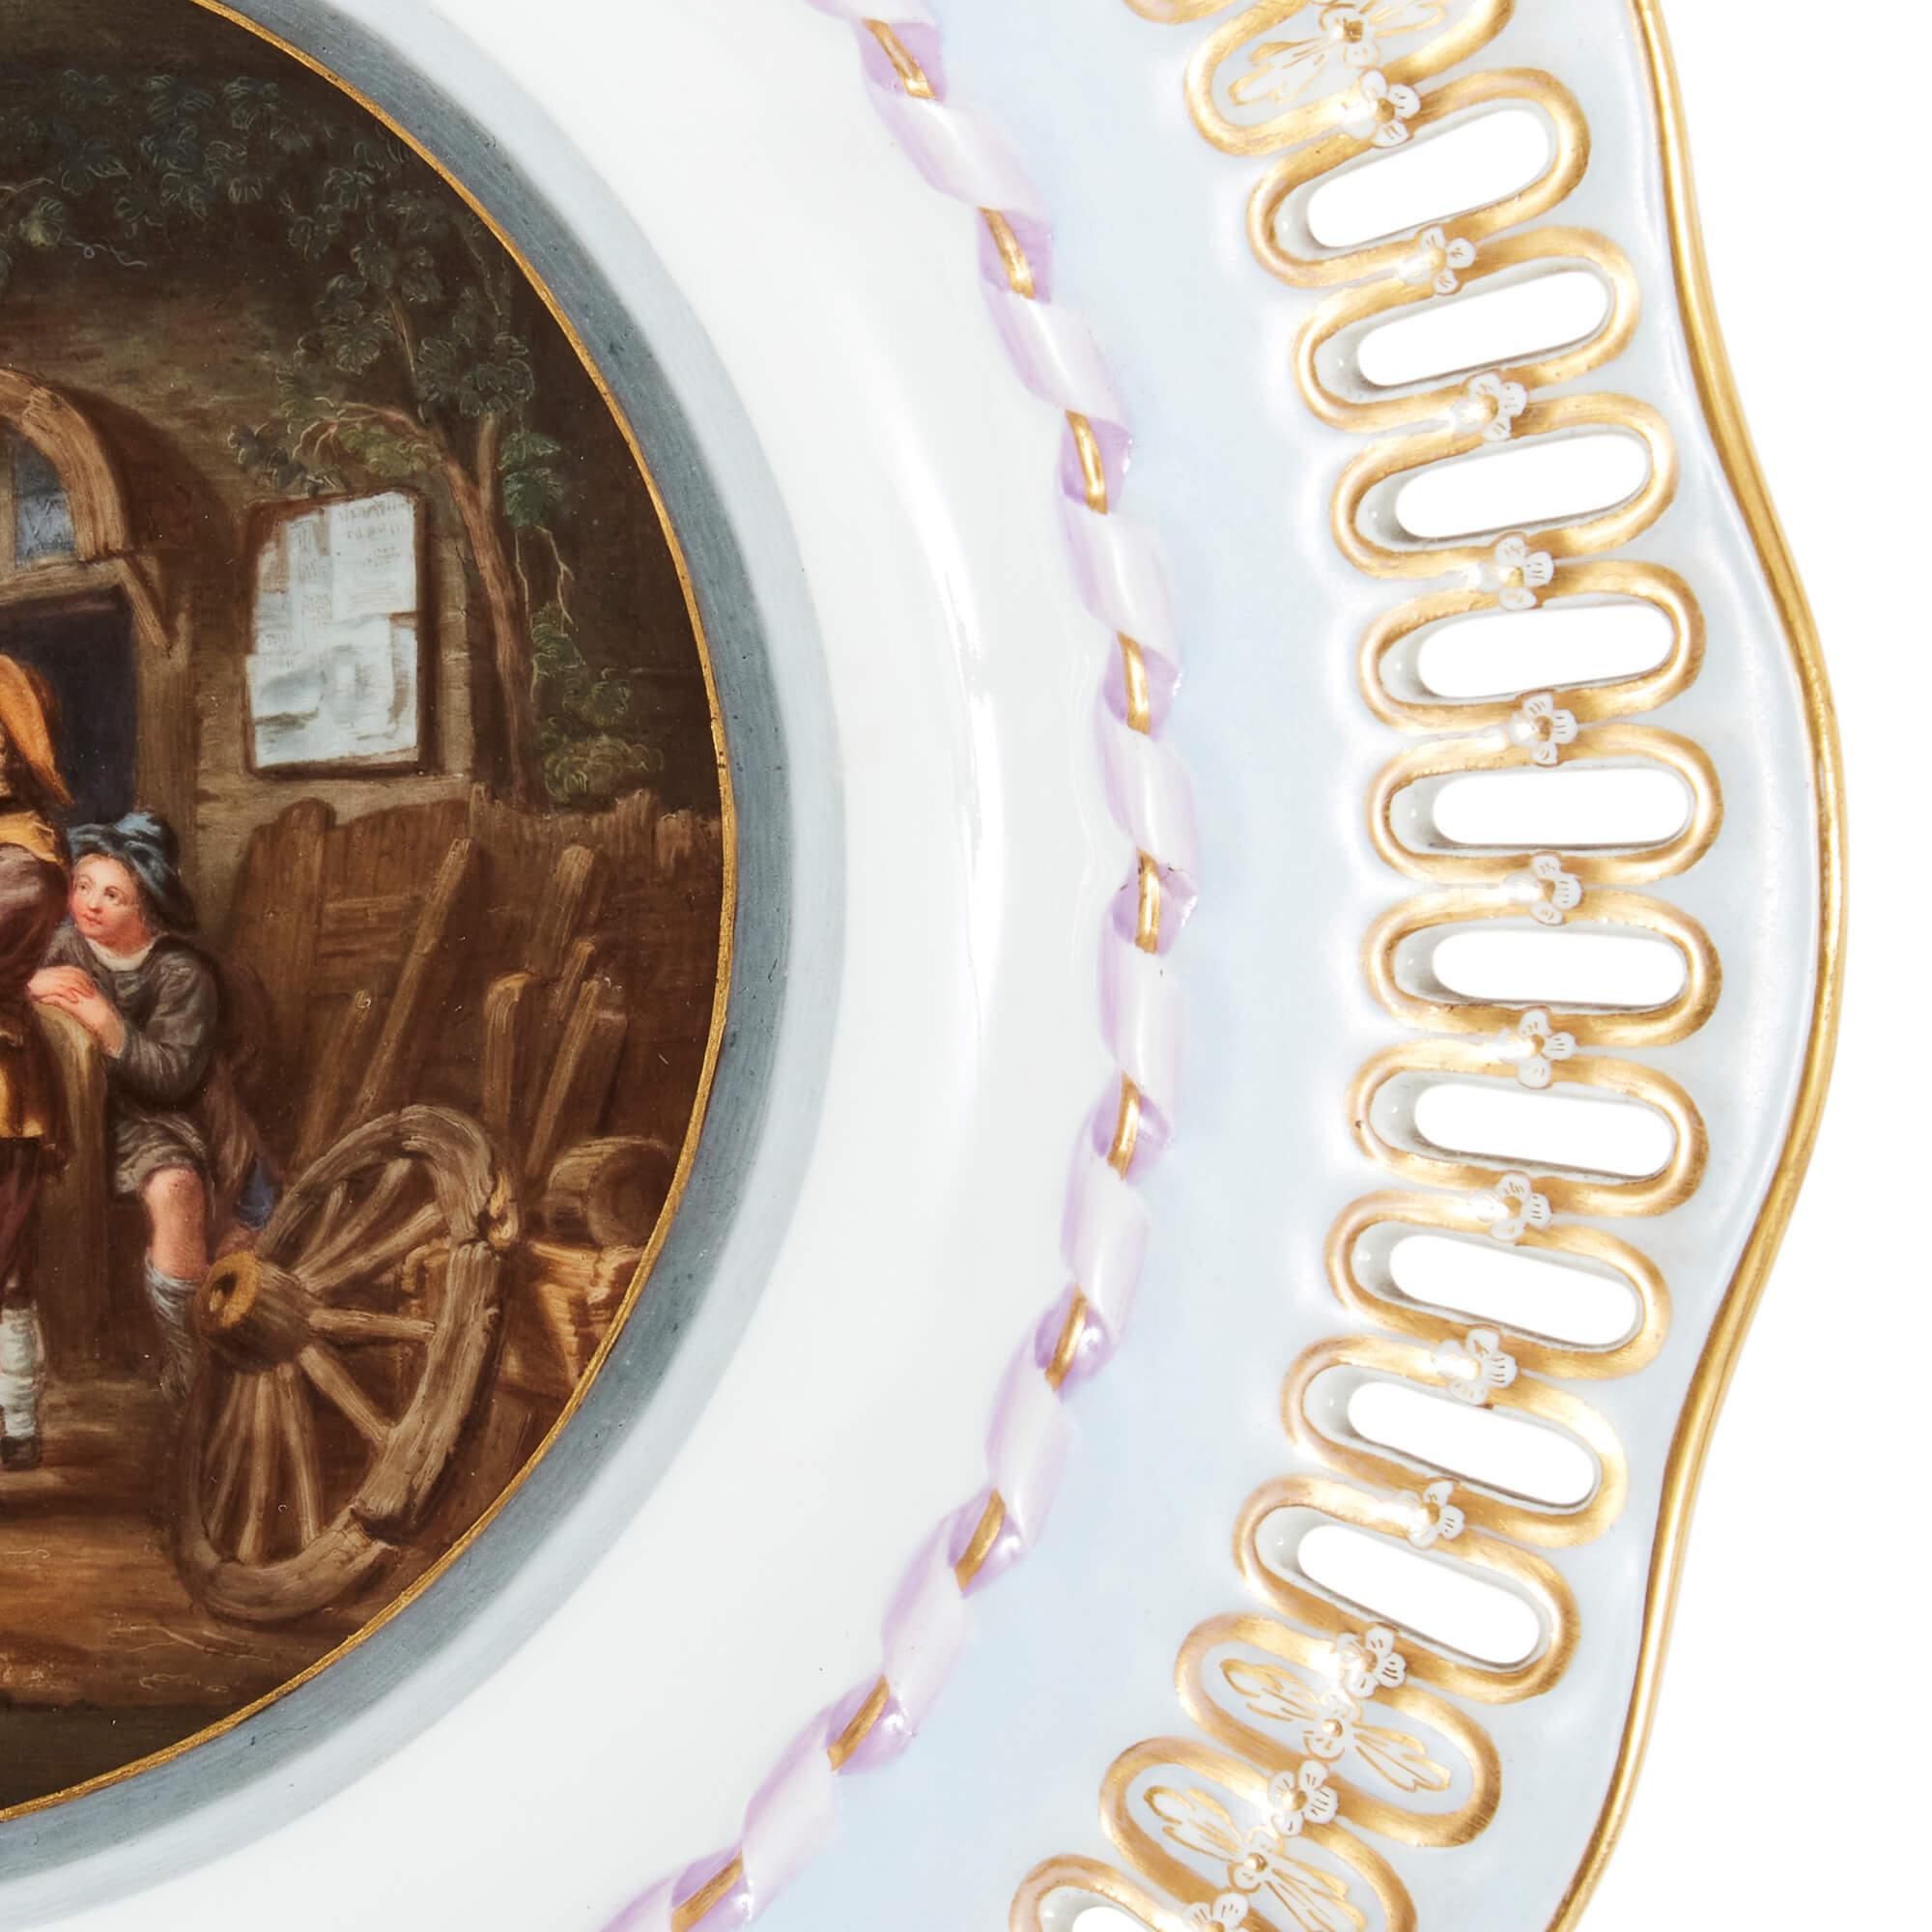 Three Meissen Porcelain Plates Showing Old Master Paintings For Sale 2